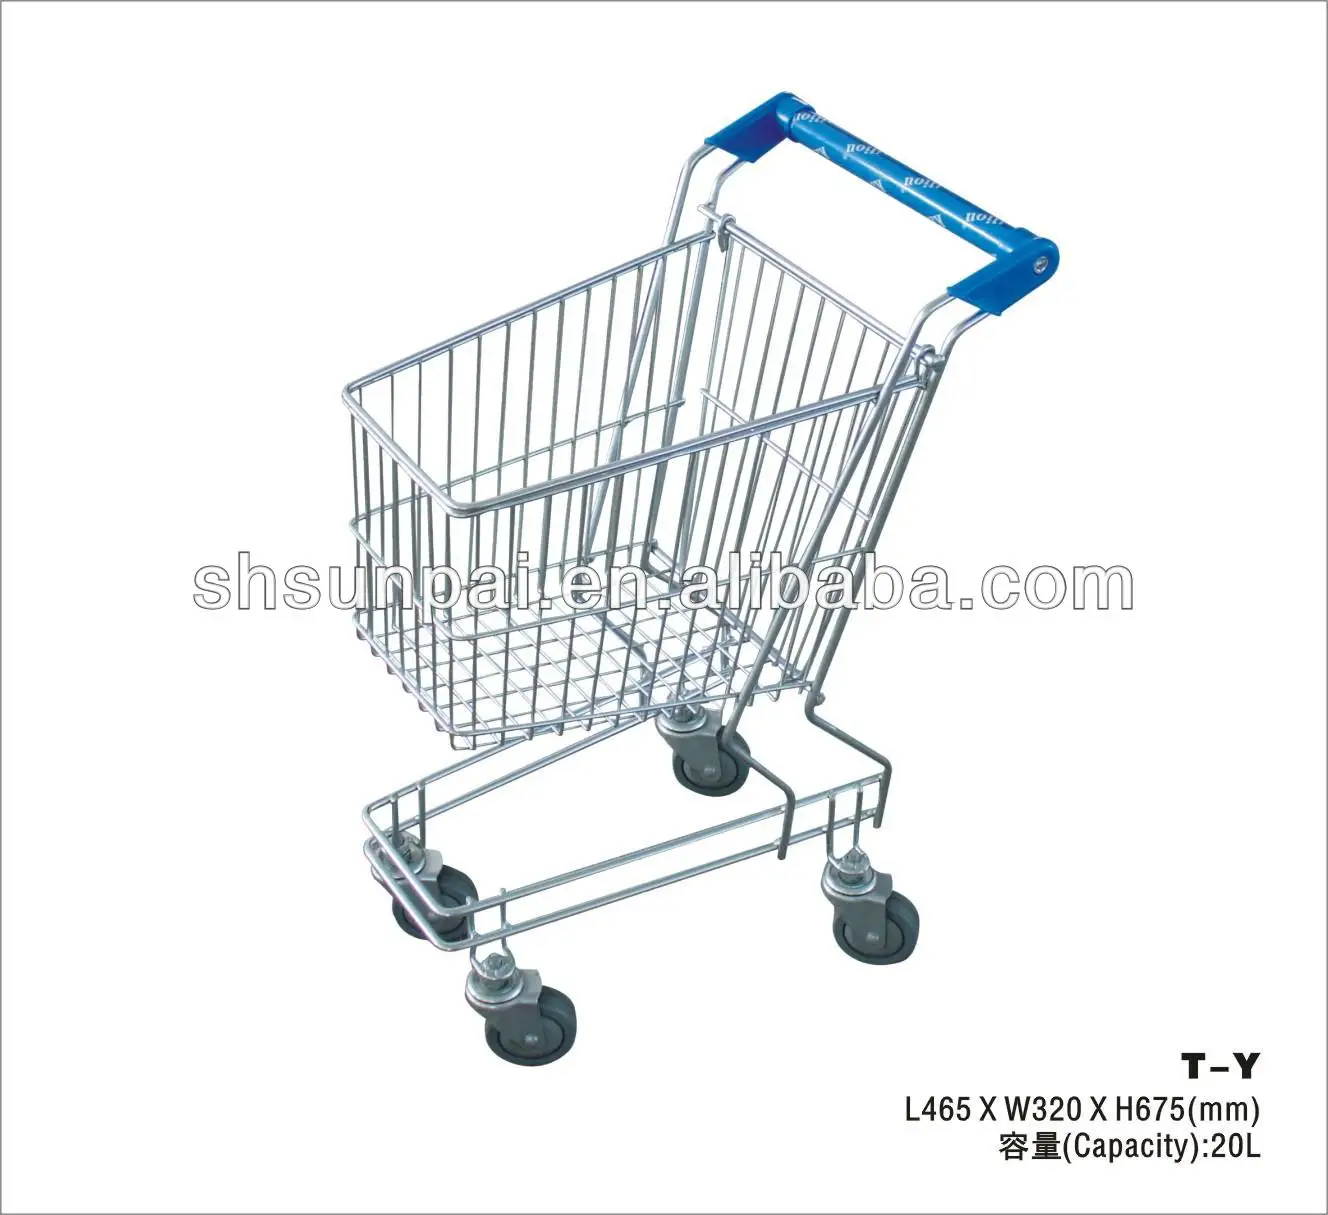 kids toy shopping trolley